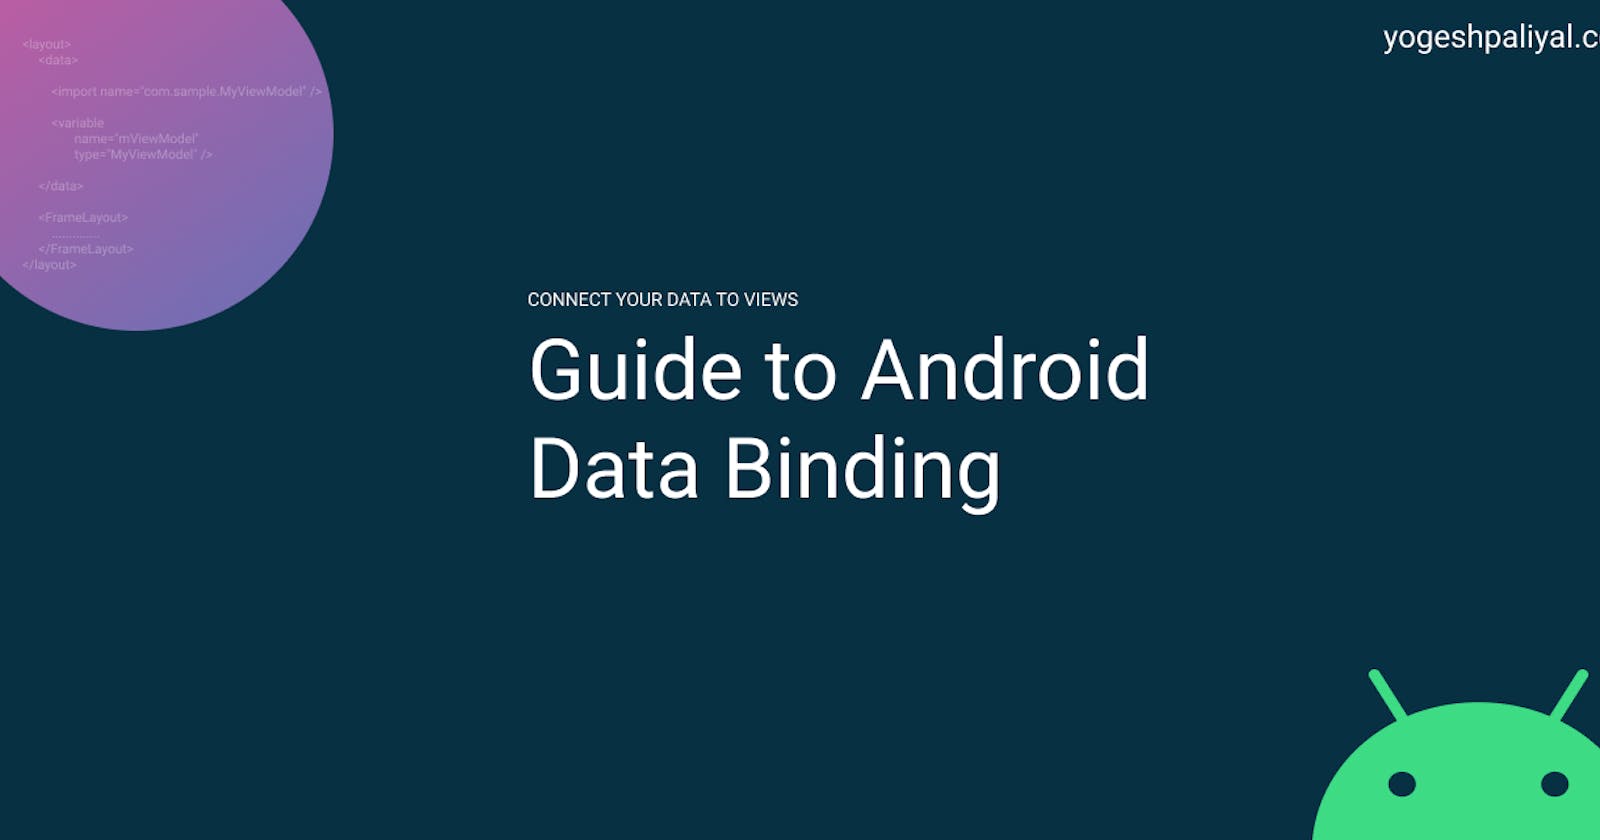 Guide to Android Data Binding